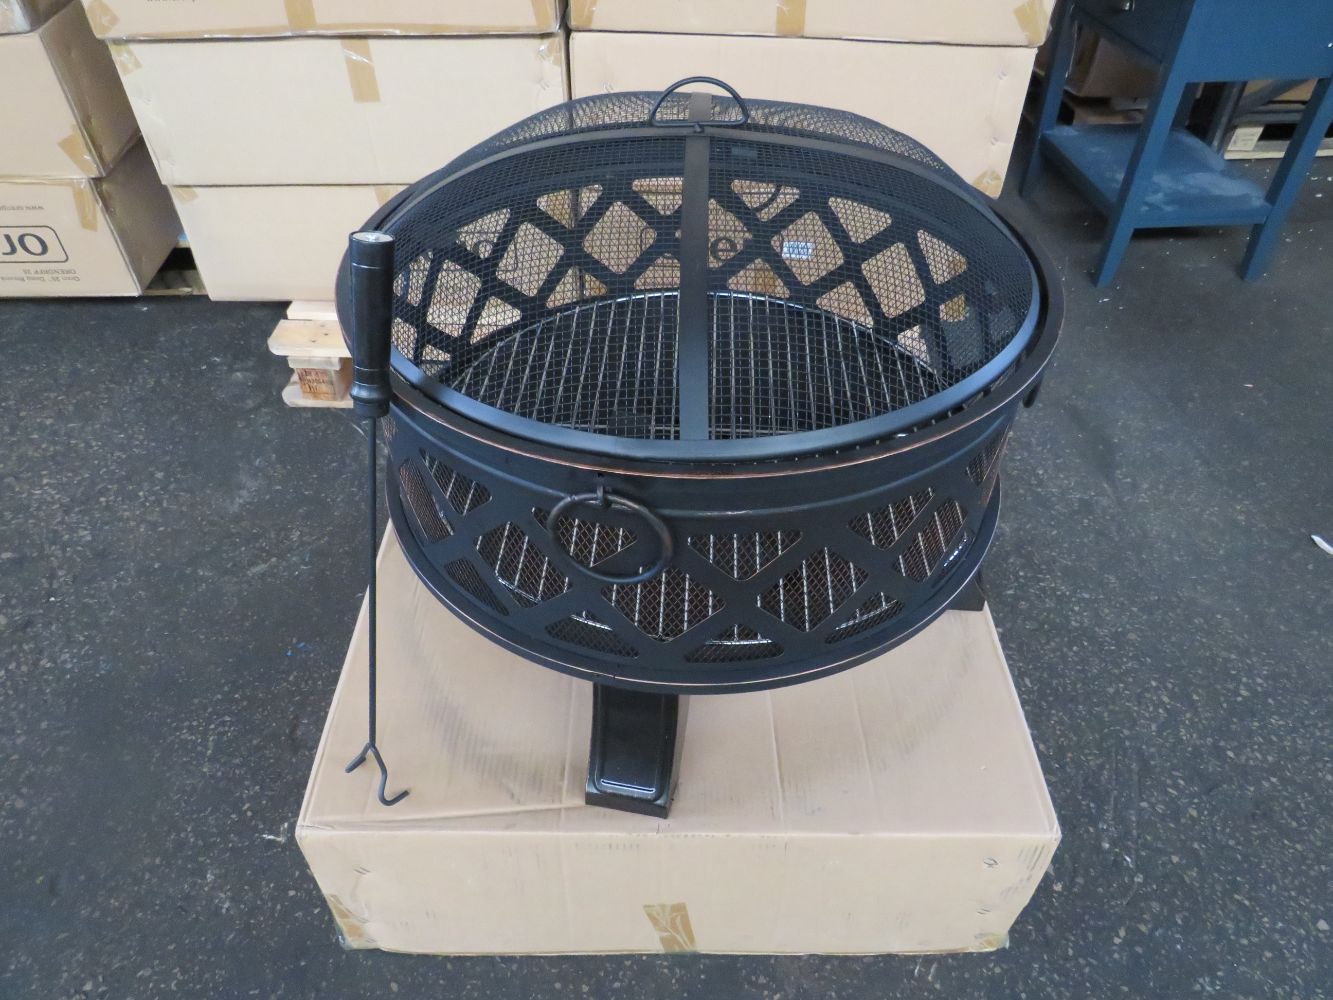 Fire, Fire Sundays Fire-Pits Auction With Bulk Lots Available !